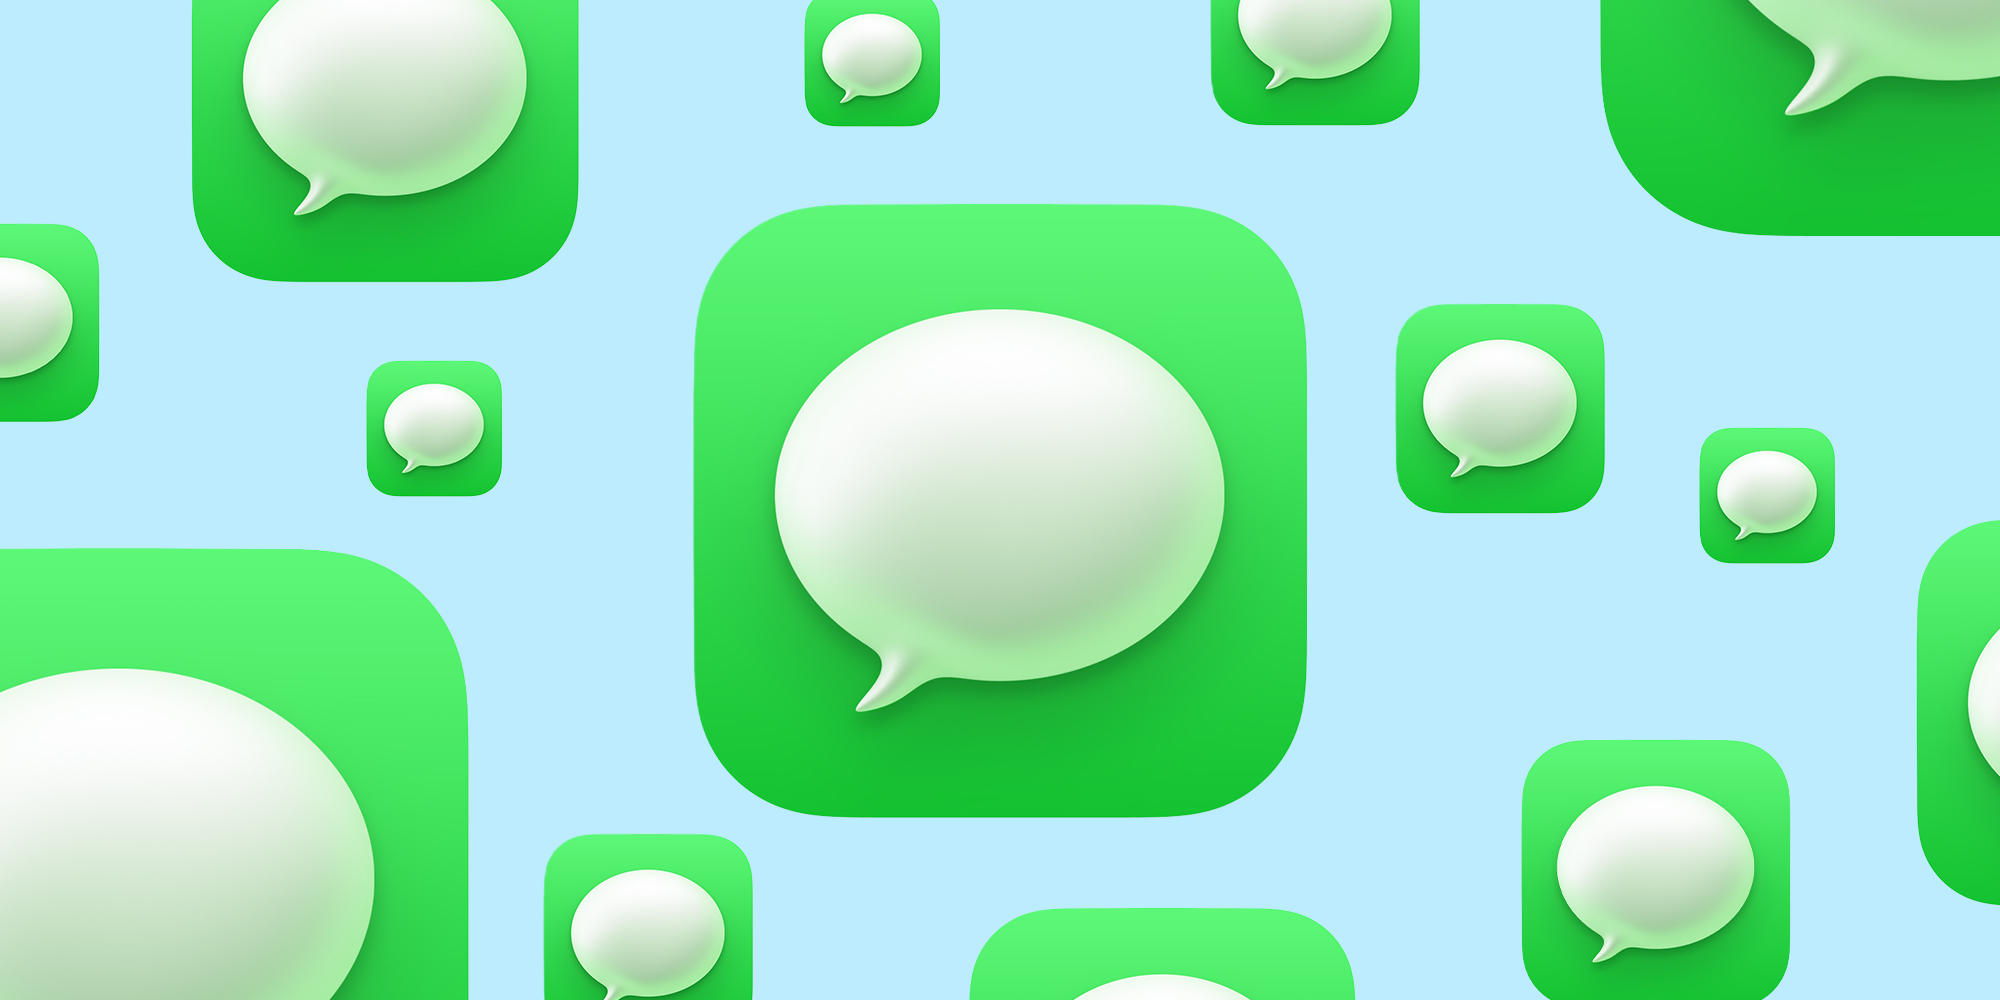 mac os messages support for the targeted service google talk has been dicontinued